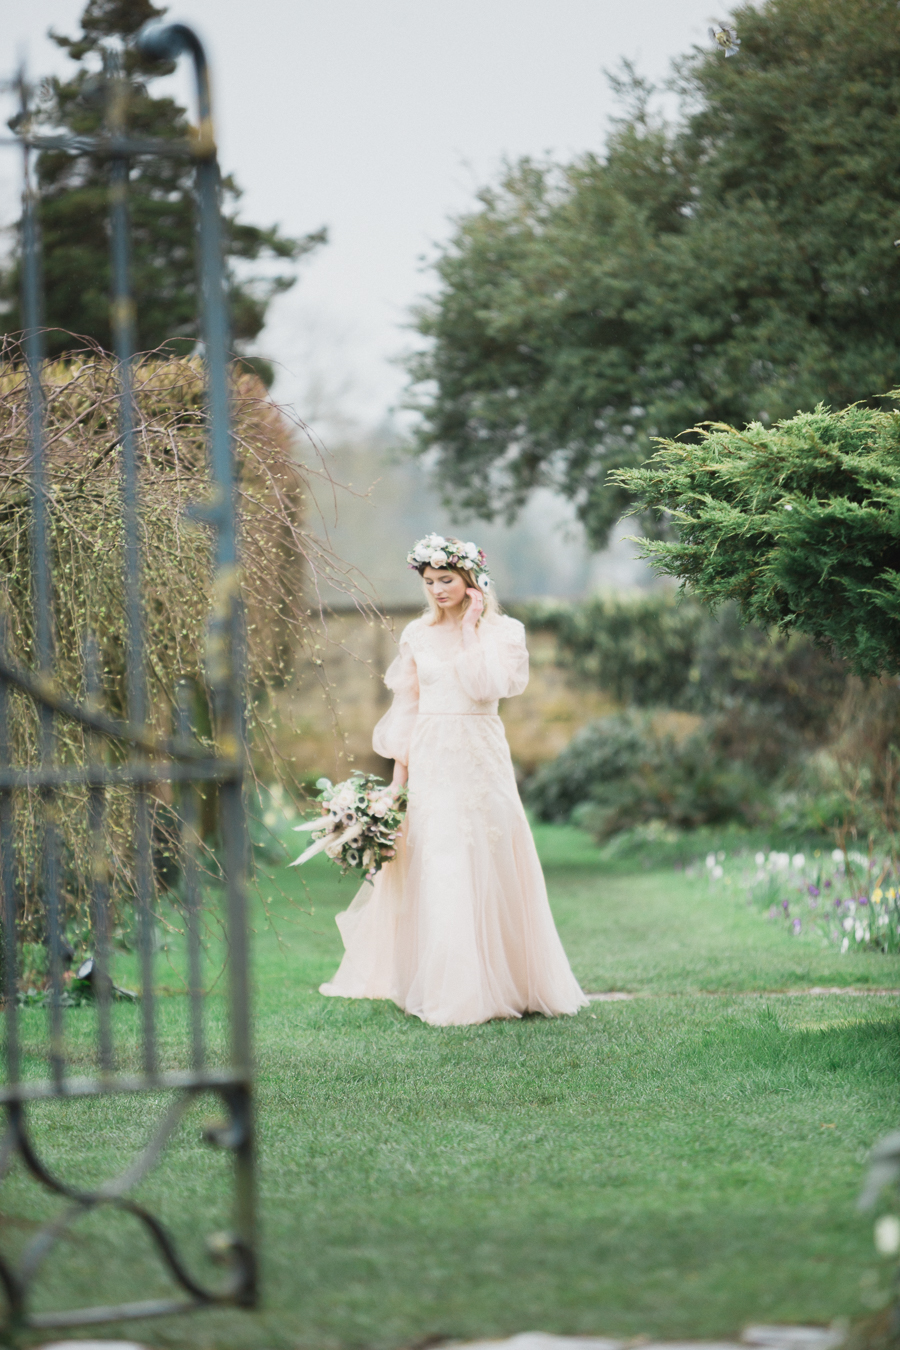 Candyfloss romance from the secret garden at Barnsley House, image credit Red Maple Photography (21)